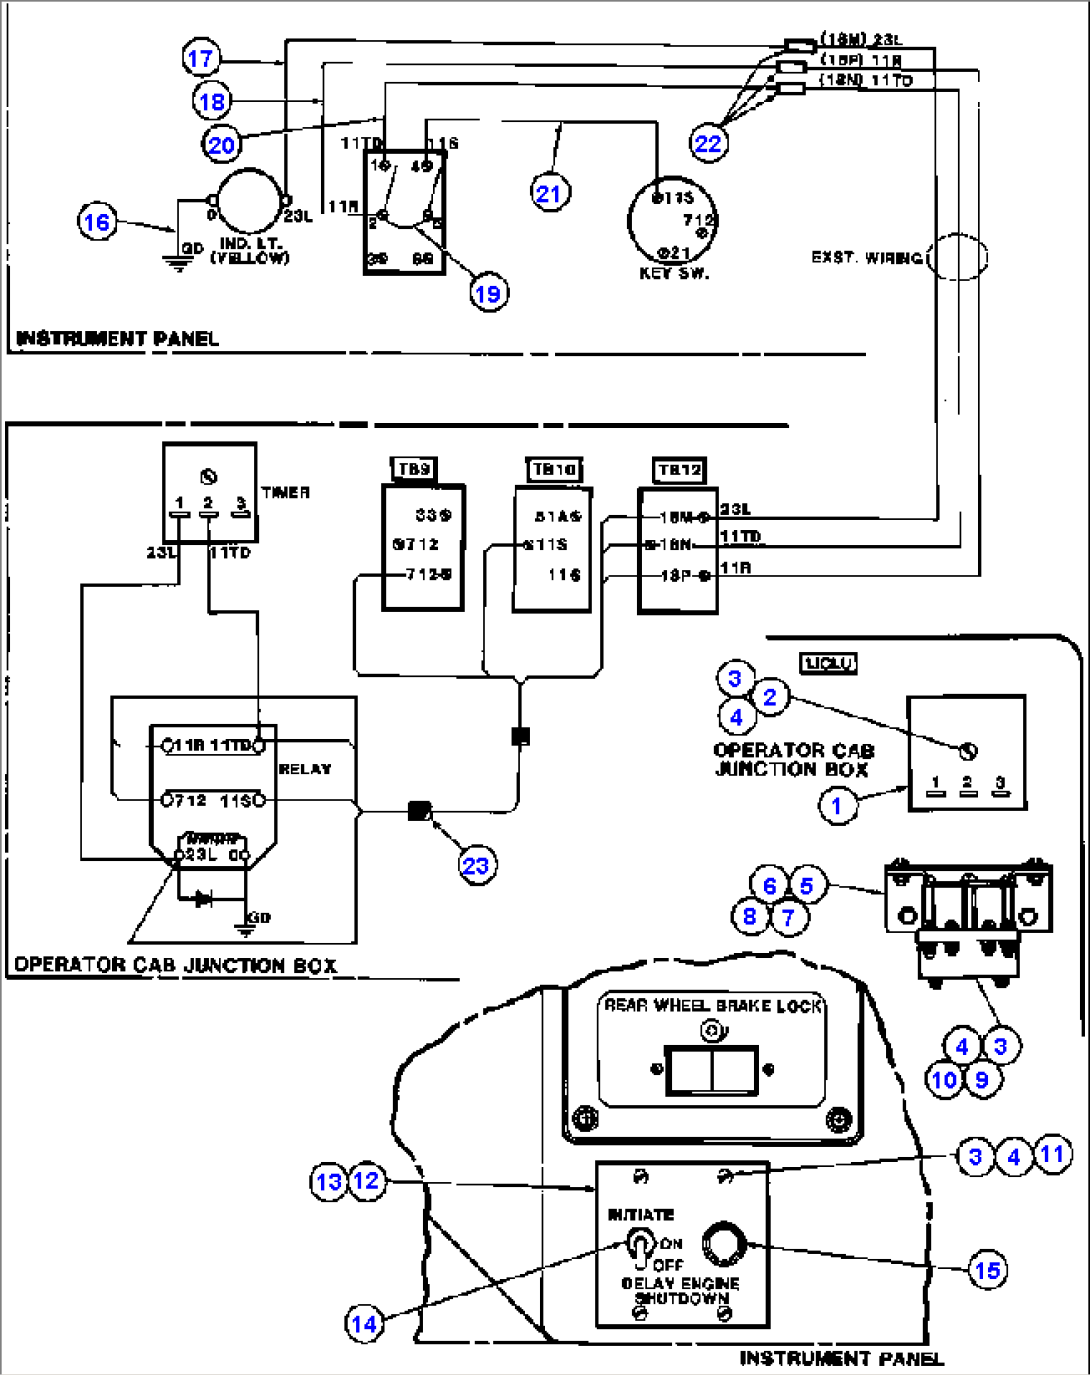 AUTOMATIC LUBRICATION SYSTEM - 1 (TX5147)